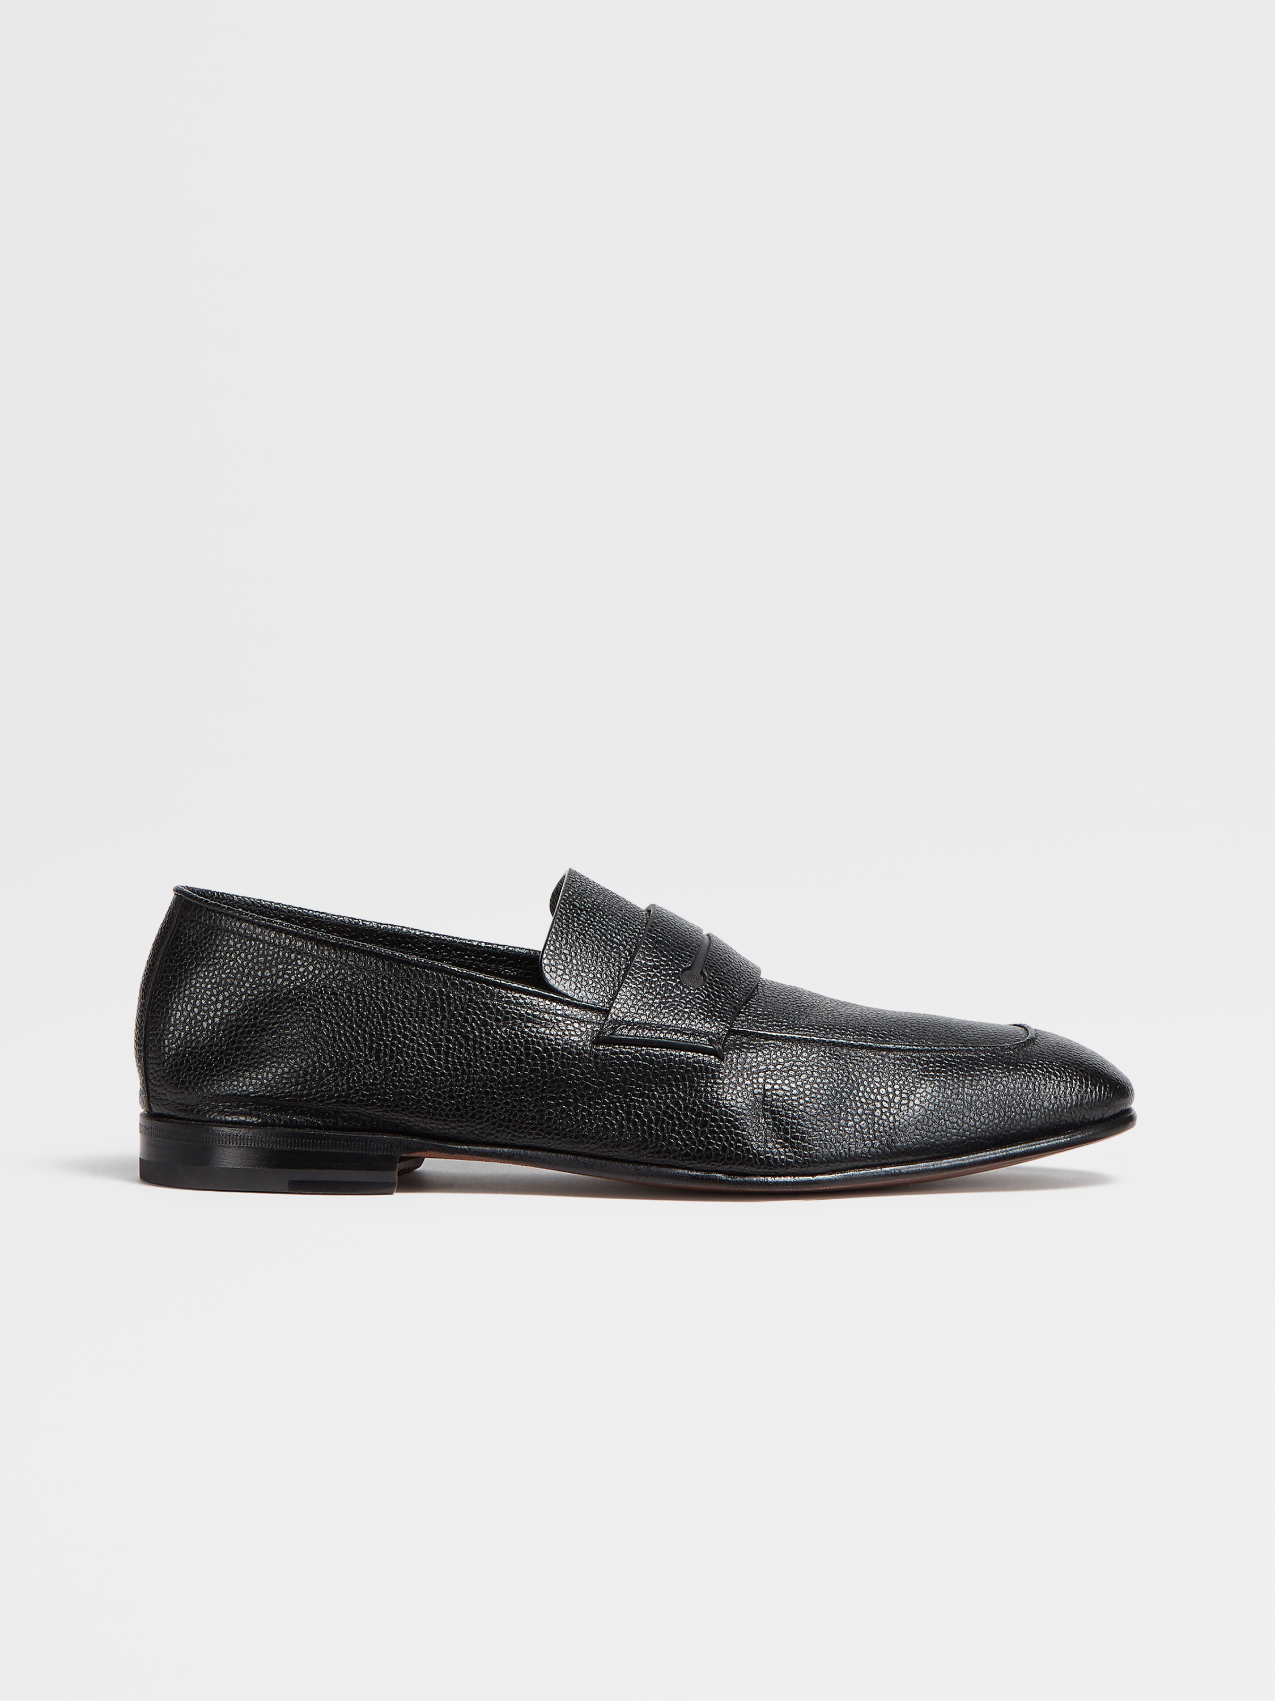 Black Leather L'Asola Loafers